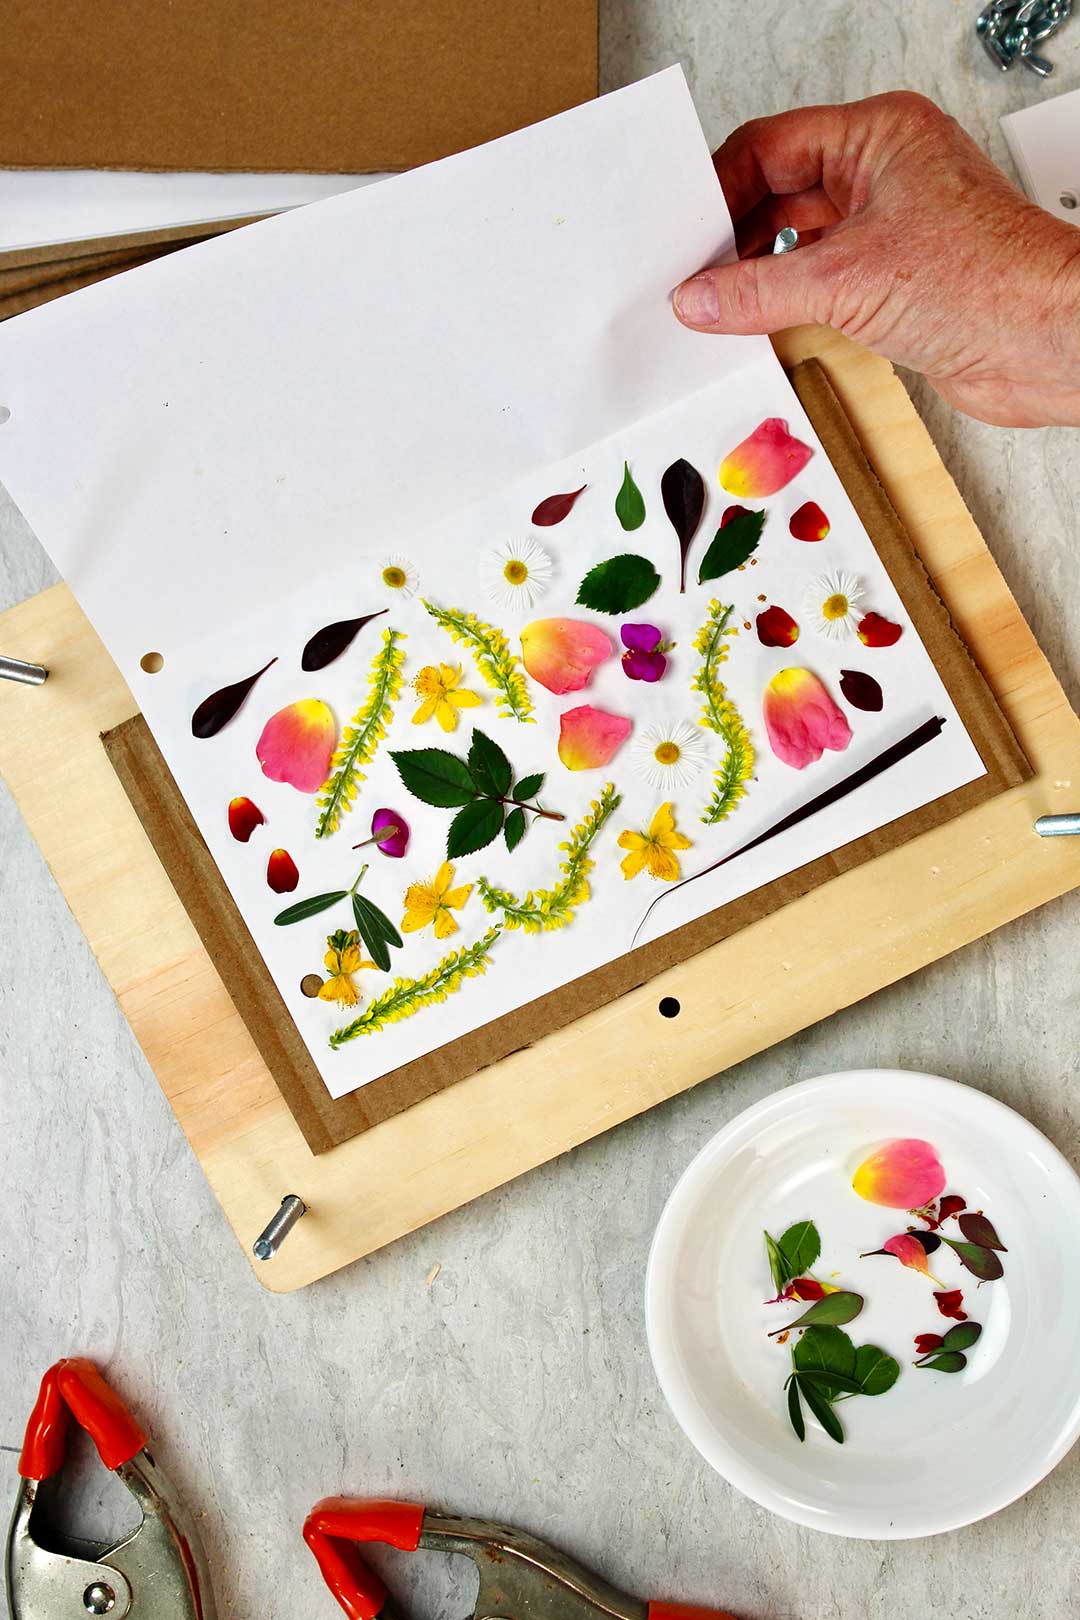 Hand holding pressed colorful flowers and leaves on white piece of paper rests inside rectangular wood block.